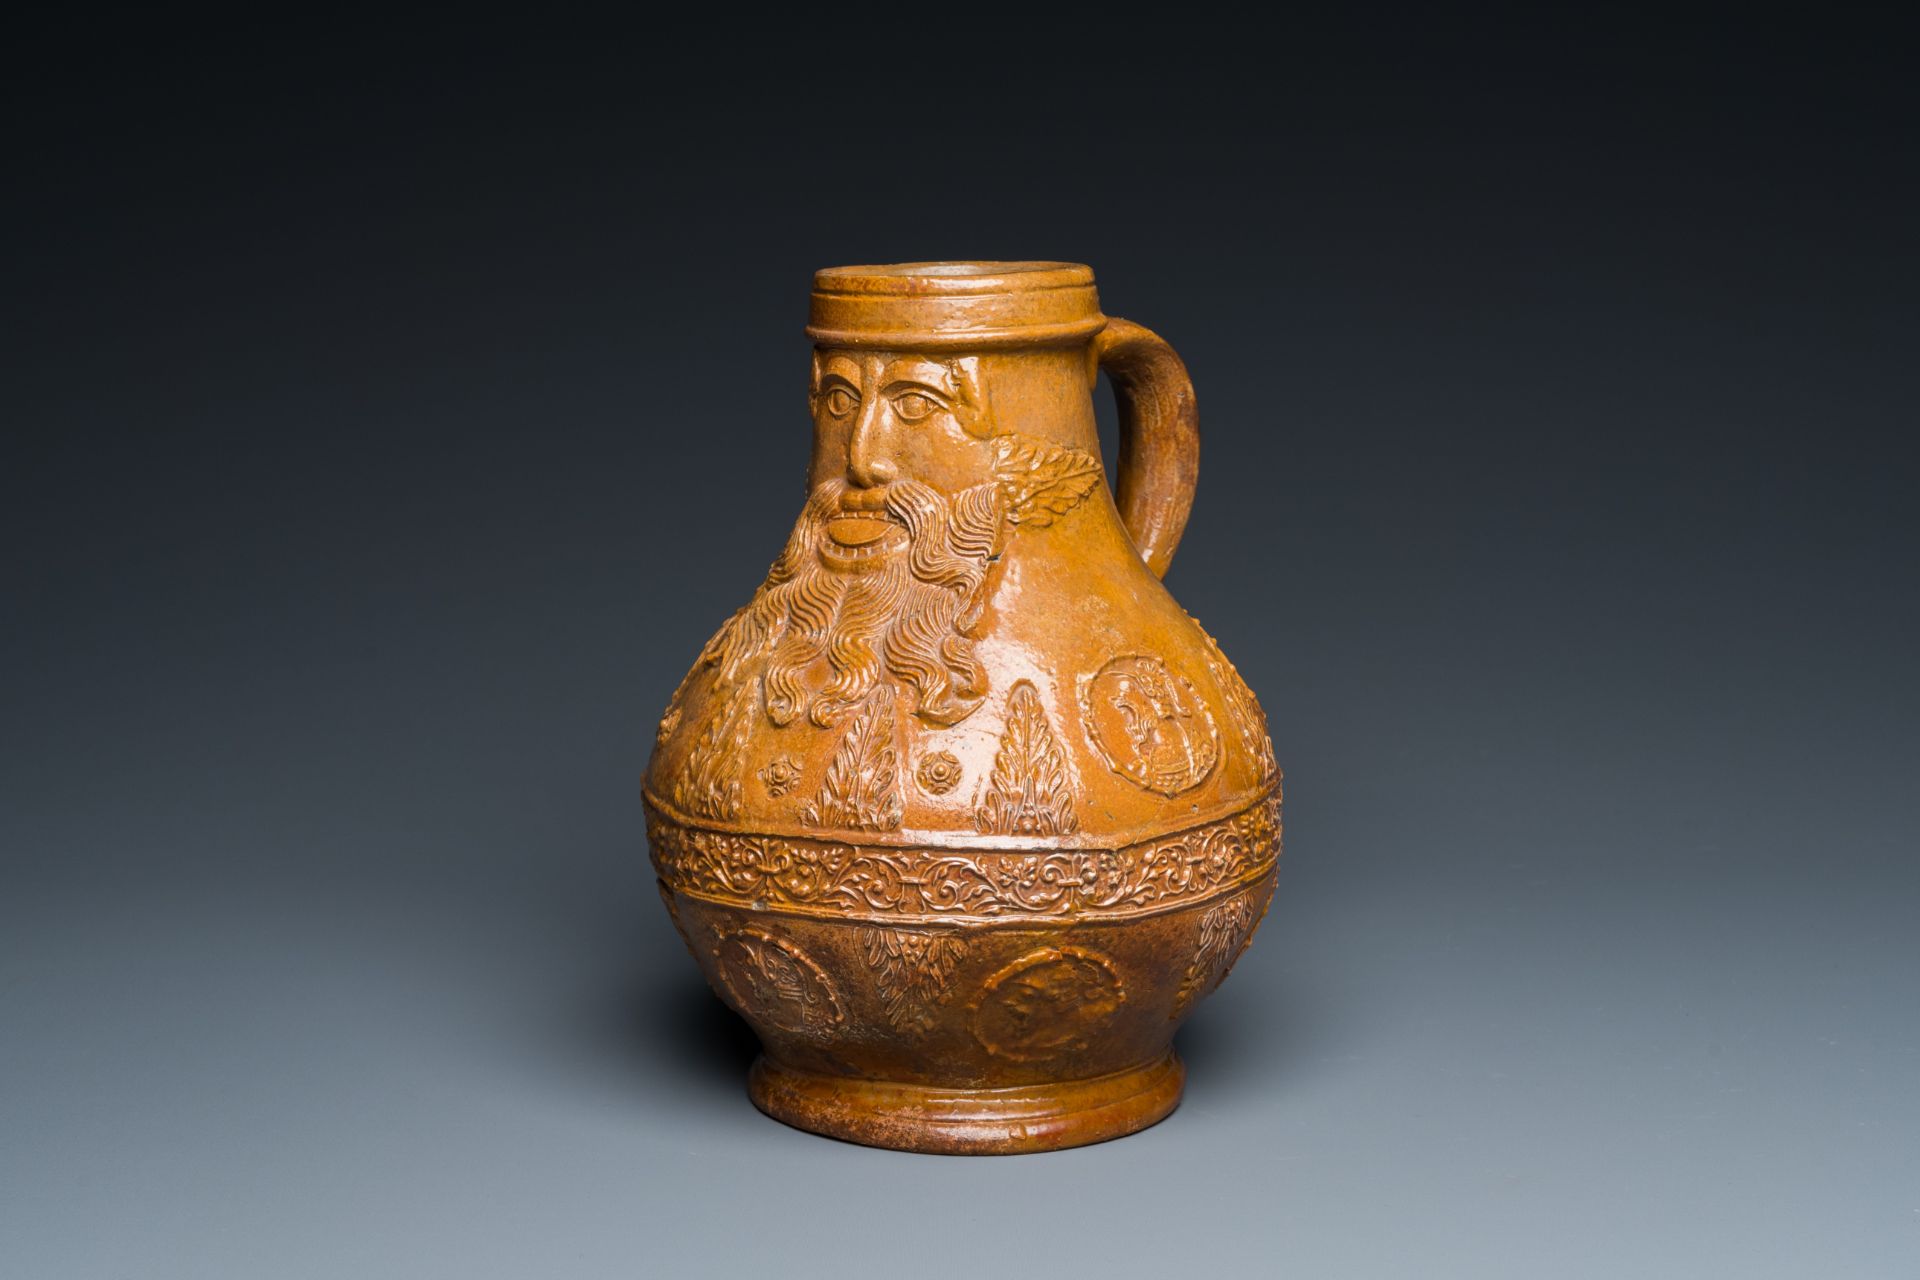 A rare German stoneware bellarmine jug with a bearded face sticking his tongue out, Cologne, 16th C.